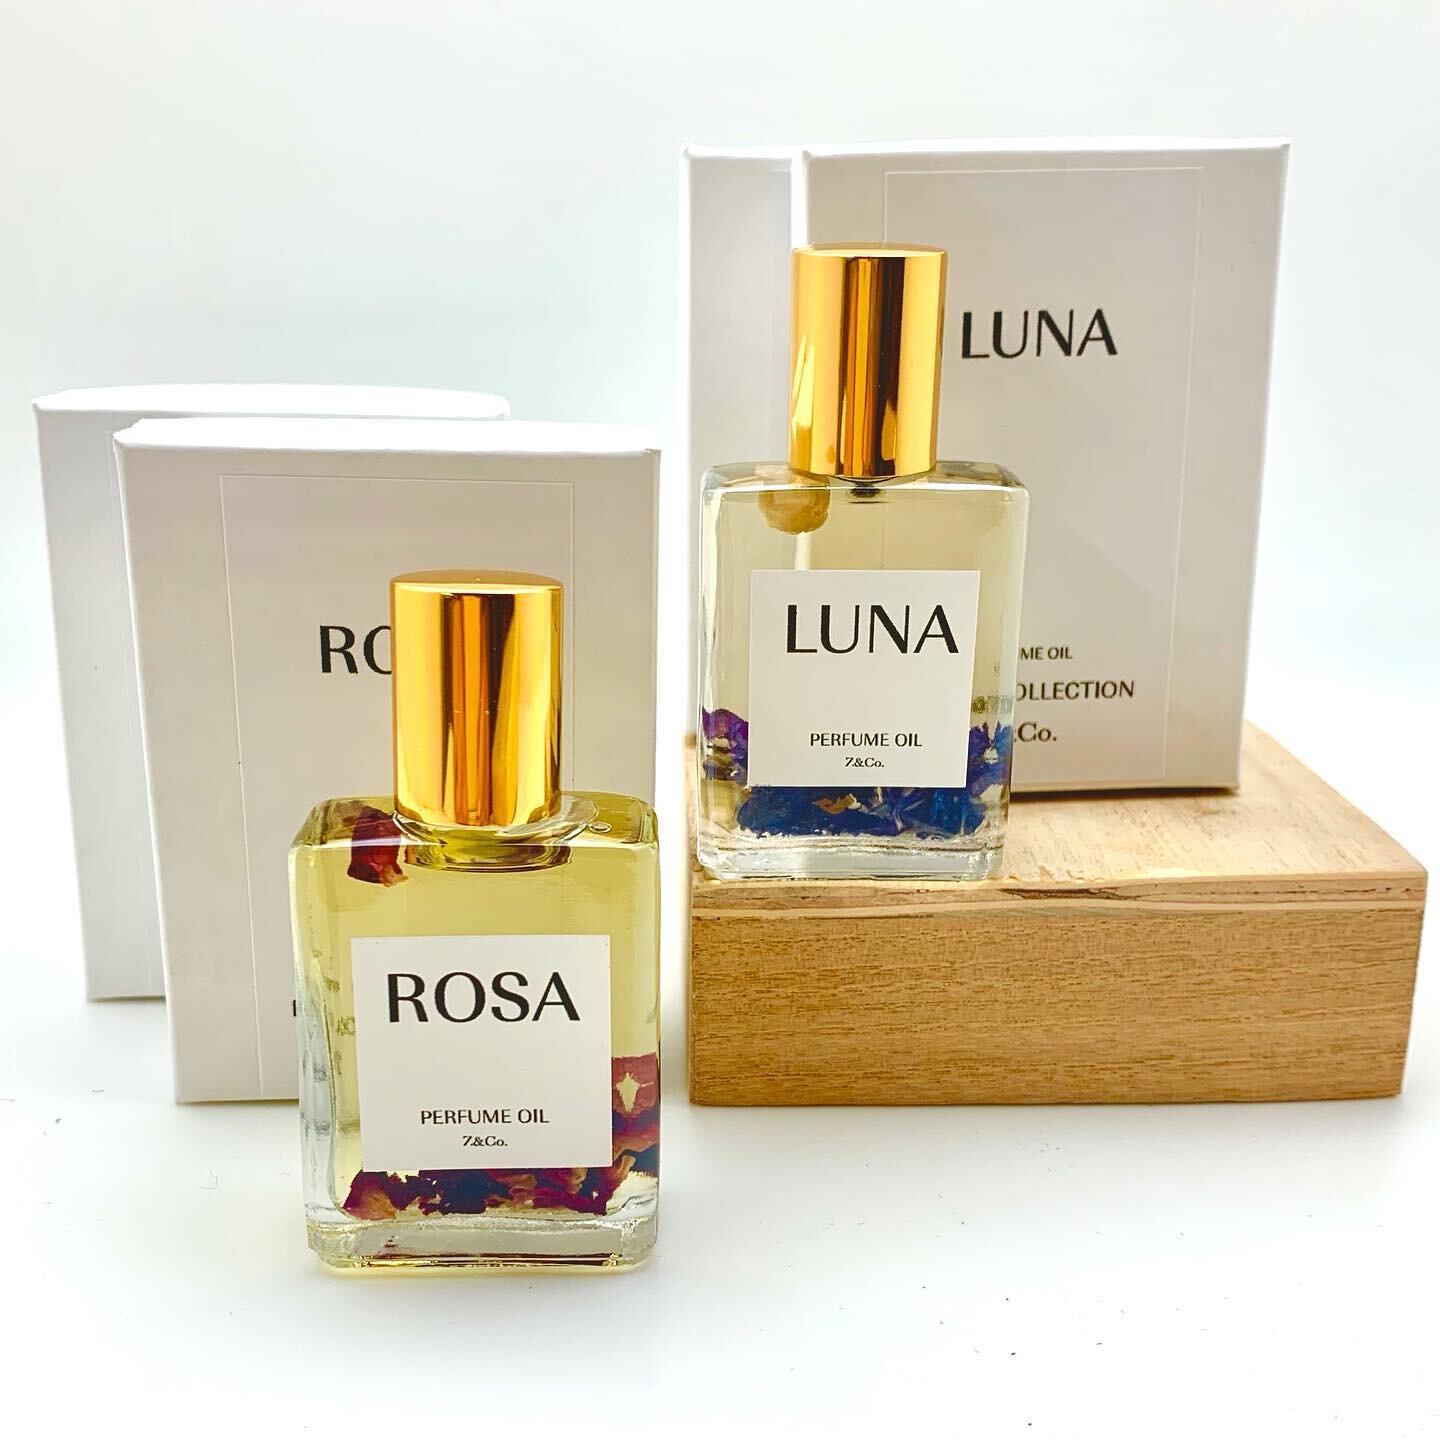 Try on a new fragrance from the Botica Collection.  #beautyandwellness #fragrancecollection #perfumeoil #lunaandrosa #emeraldforest #giftideas #shoplocal #giftguide